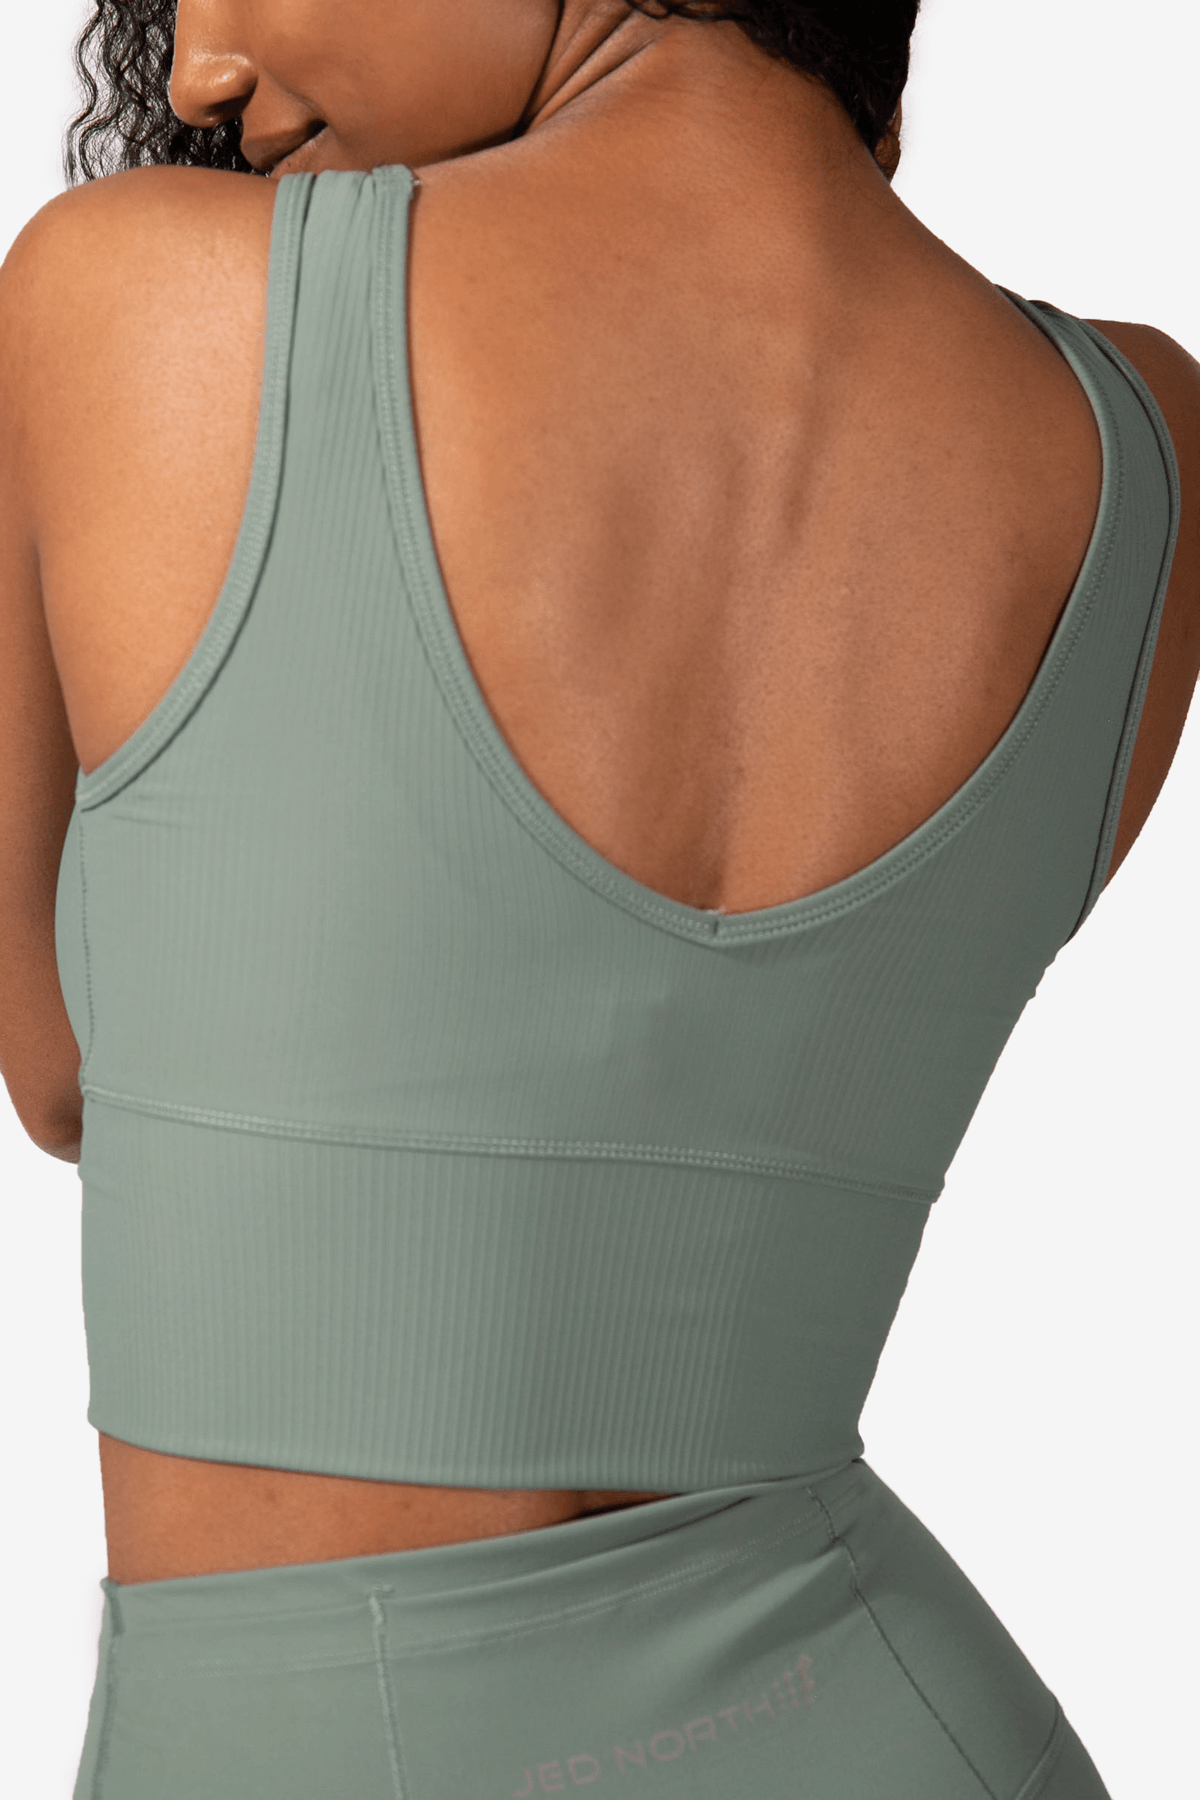 Out From Under Harmony Rib Halter Bra Top